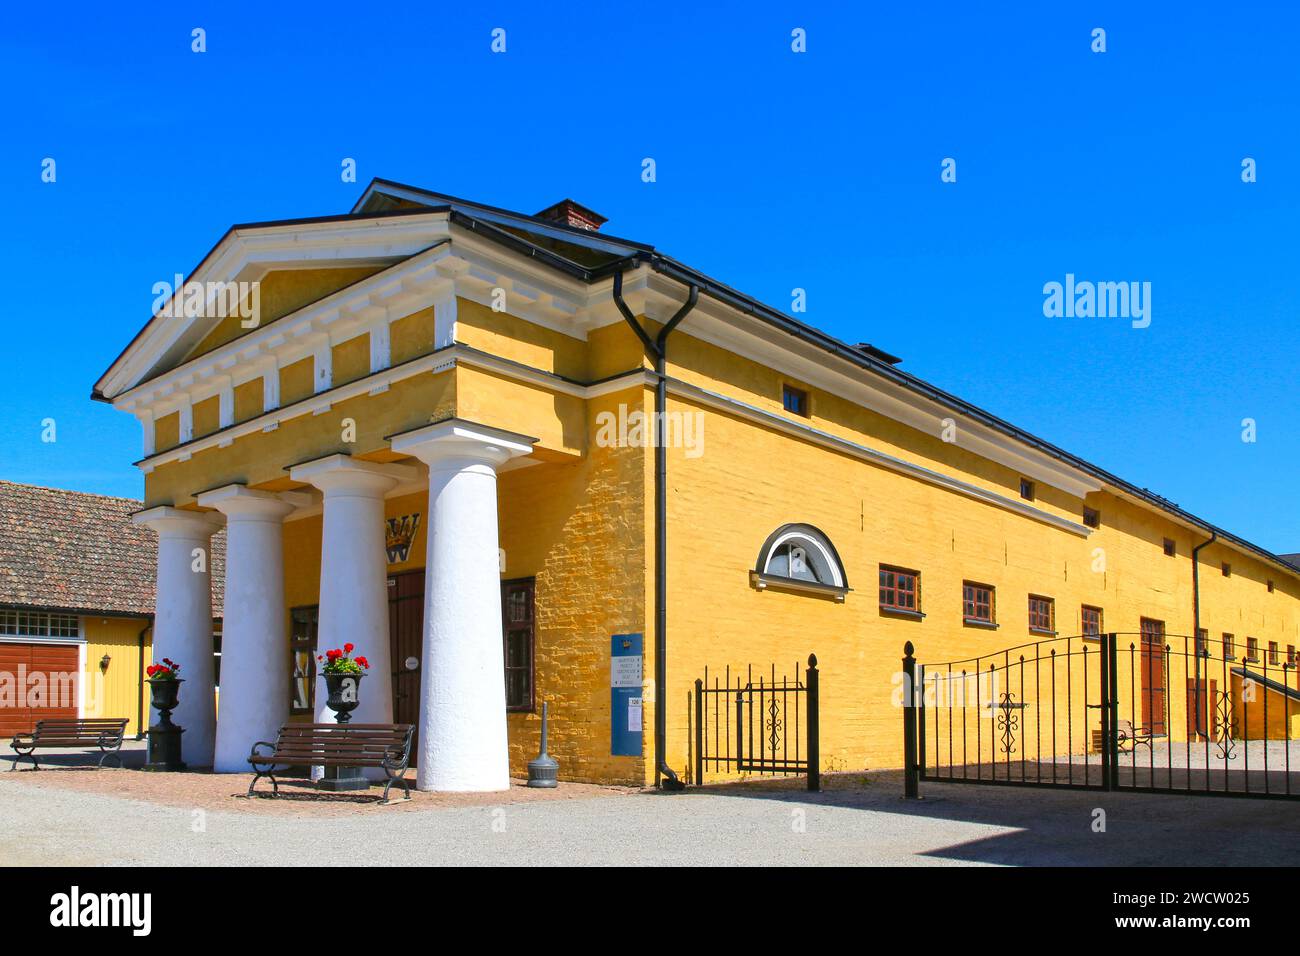 Wiurila Manor homestead designed by C. L. Engel, built 1835–1845, with Doric portico on a sunny day of summer. Halikko, Salo, Finland. June 25, 2022 Stock Photo